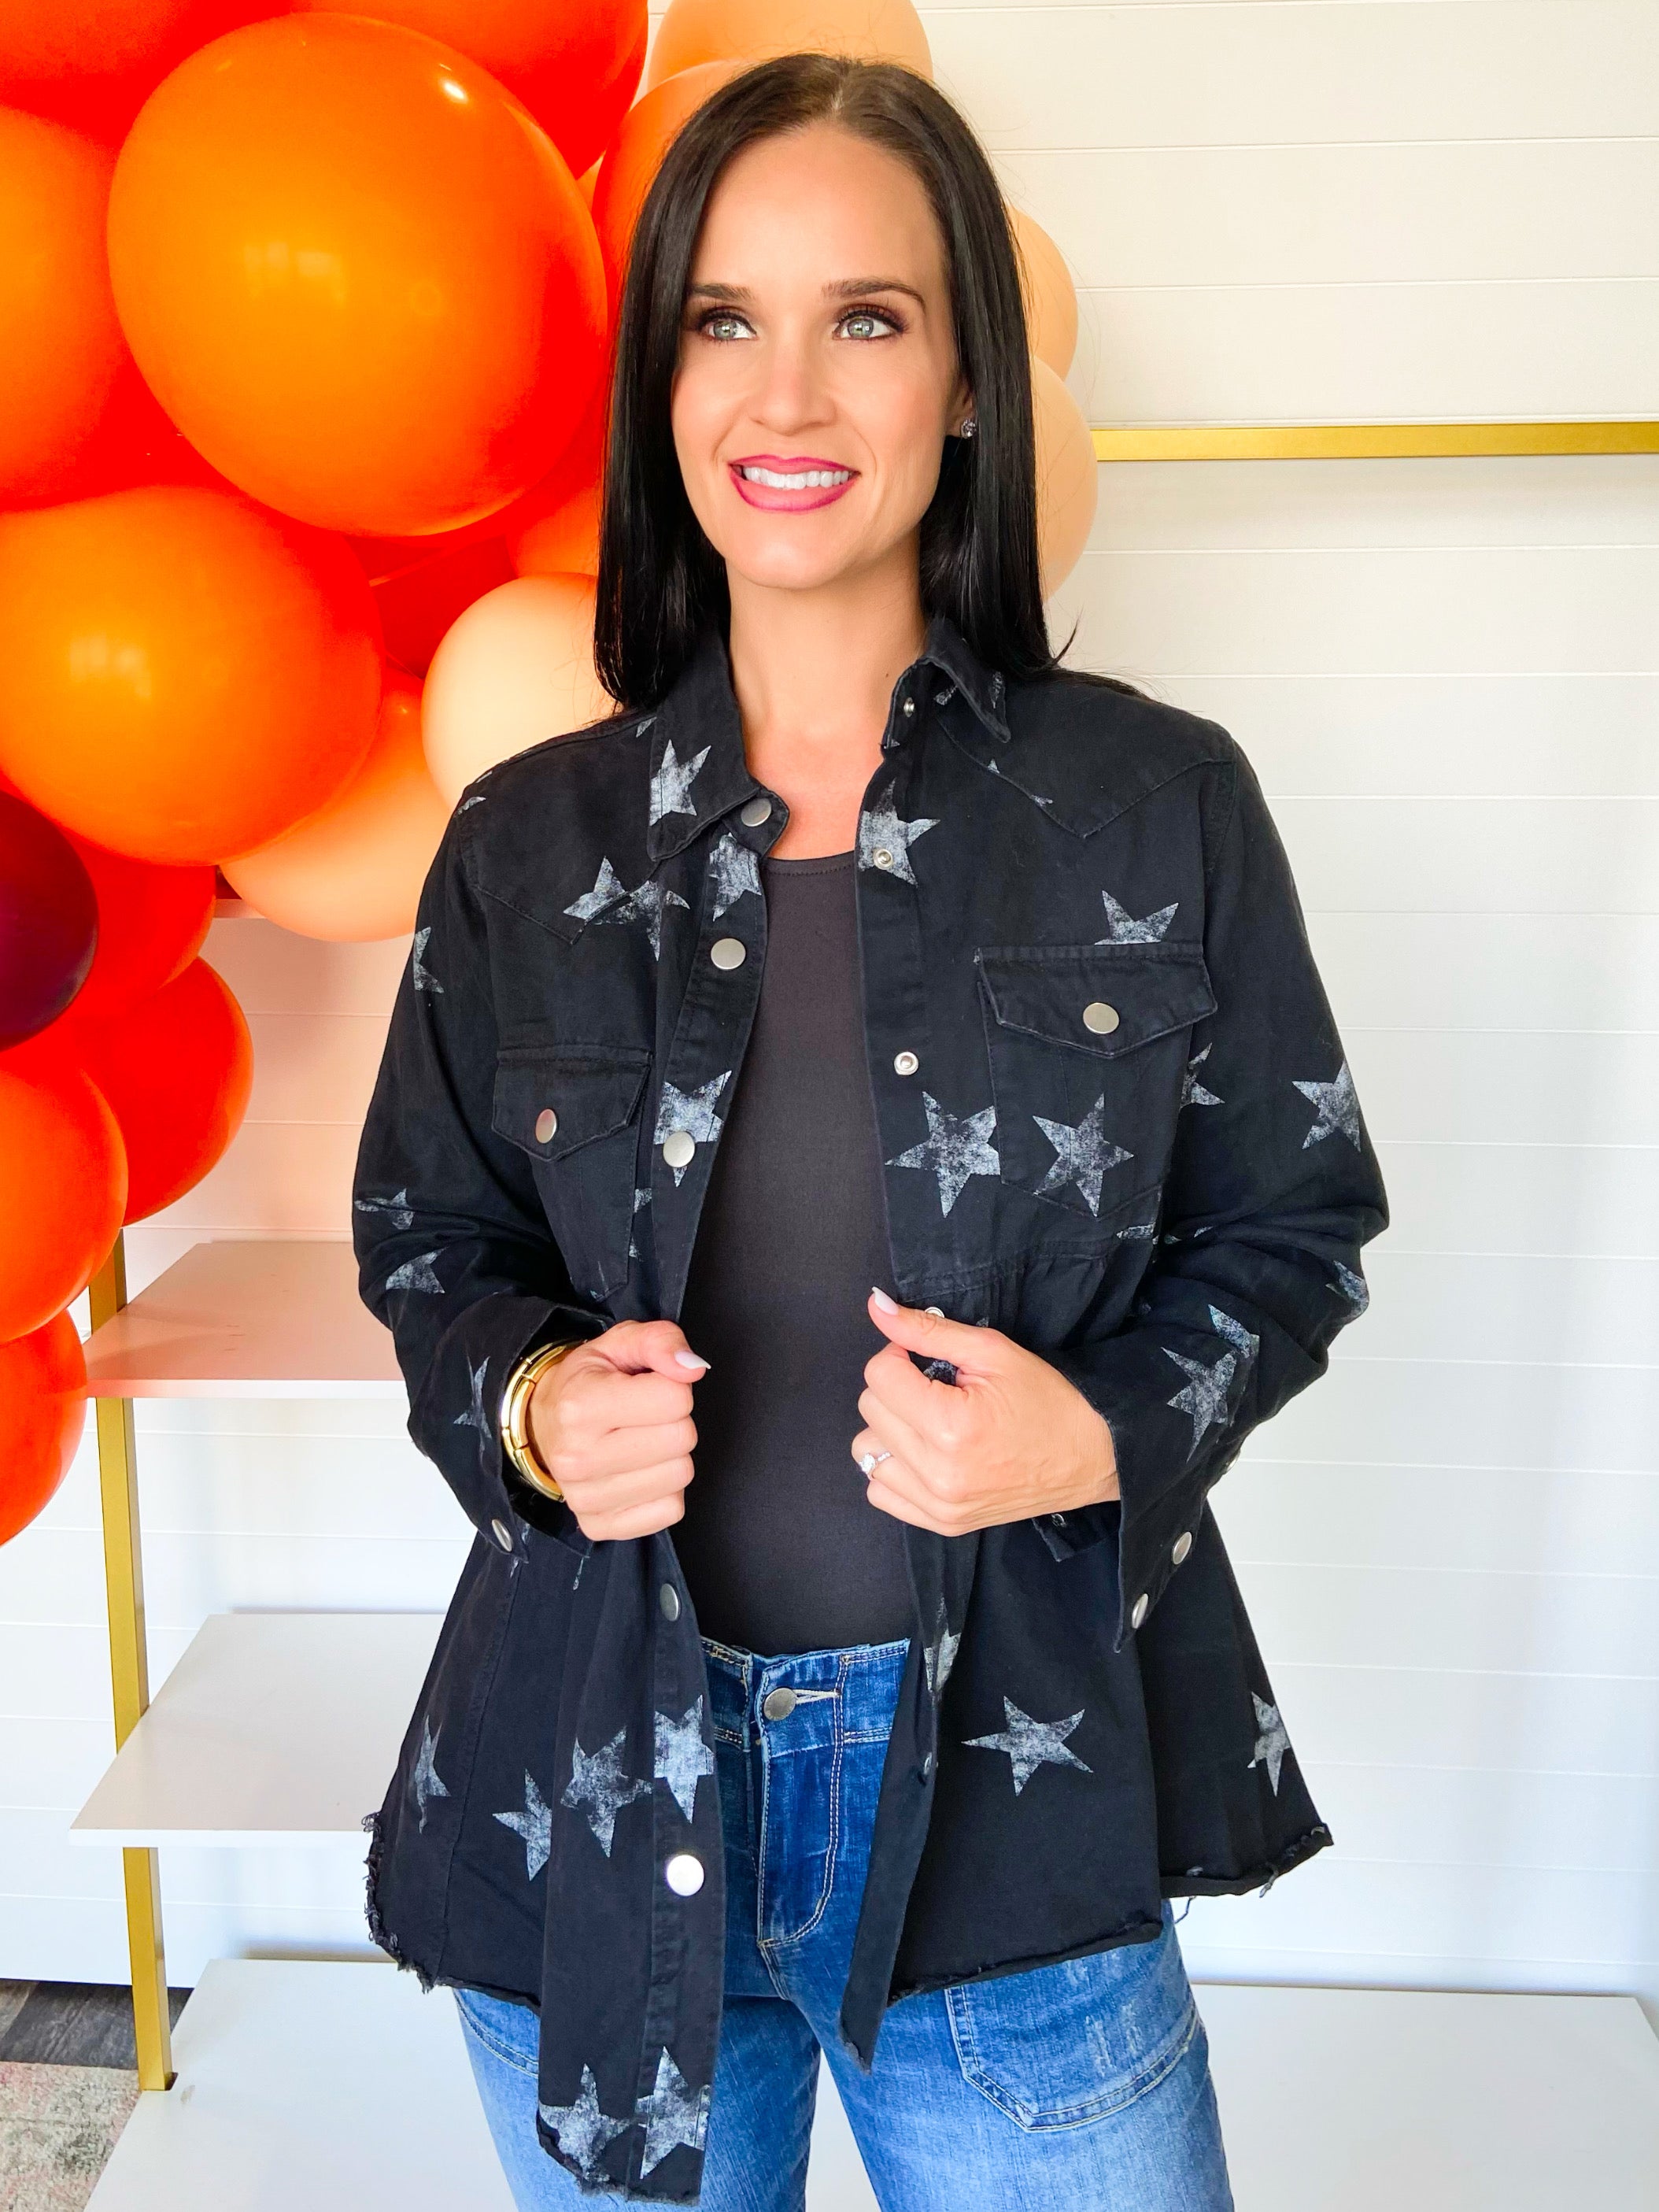 Jean jacket outfit - pairing an embellished denim jacket with all black is  such a chic and easy outfit idea! Click through for more of this spring  transition ou…